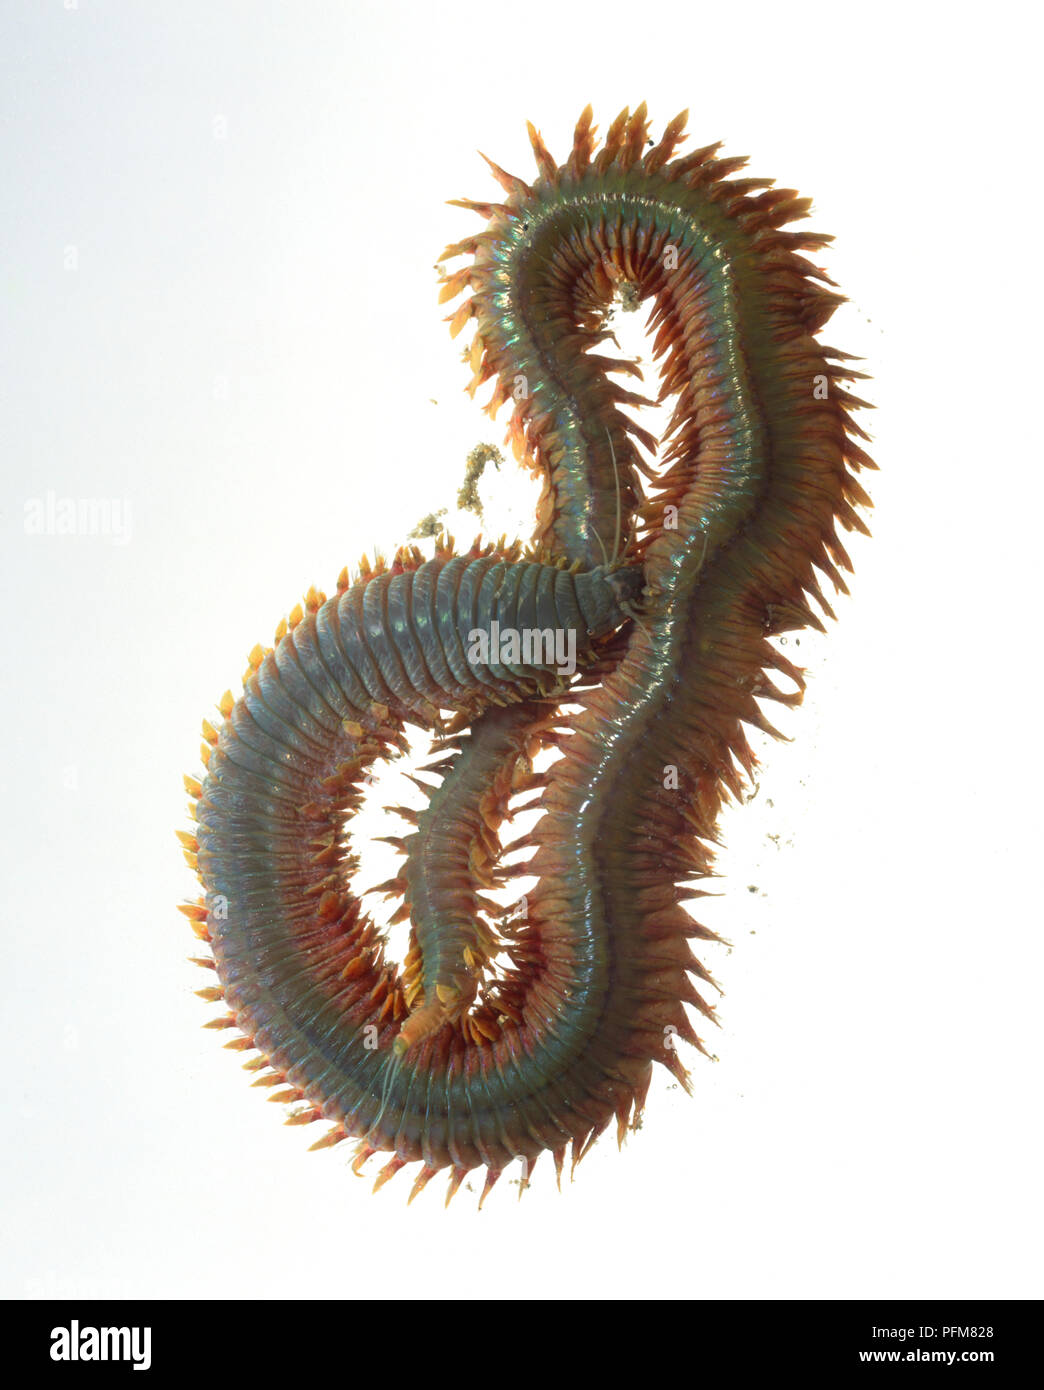 King Ragworm (Nereis virens) curled up Stock Photo